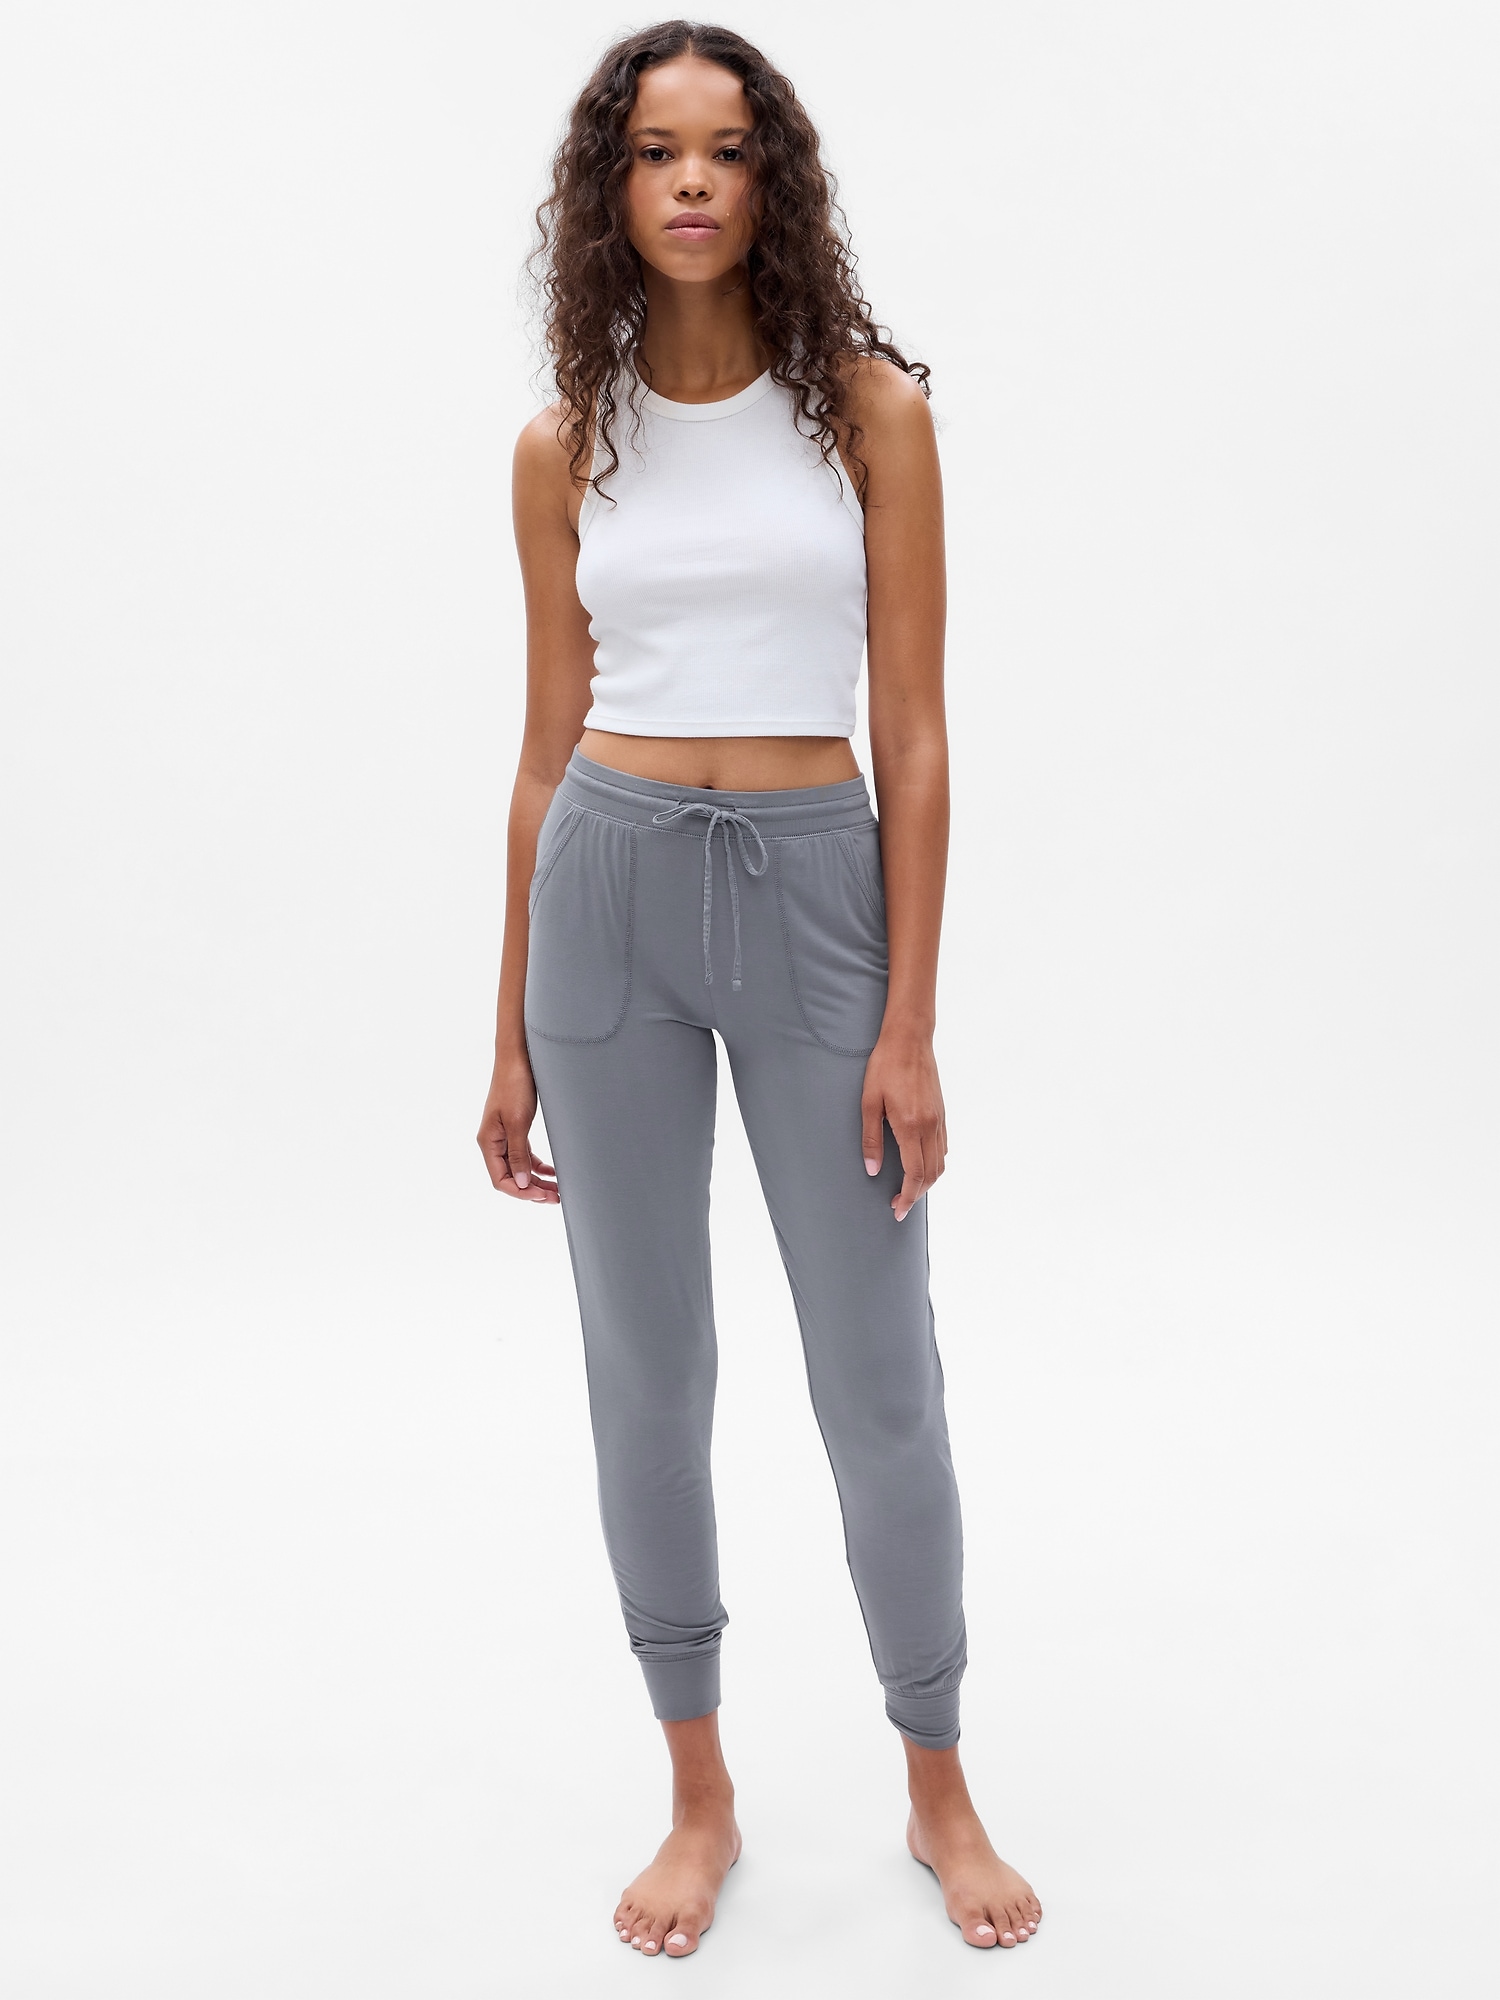 Dressy Joggers for Work, Blushing Petite